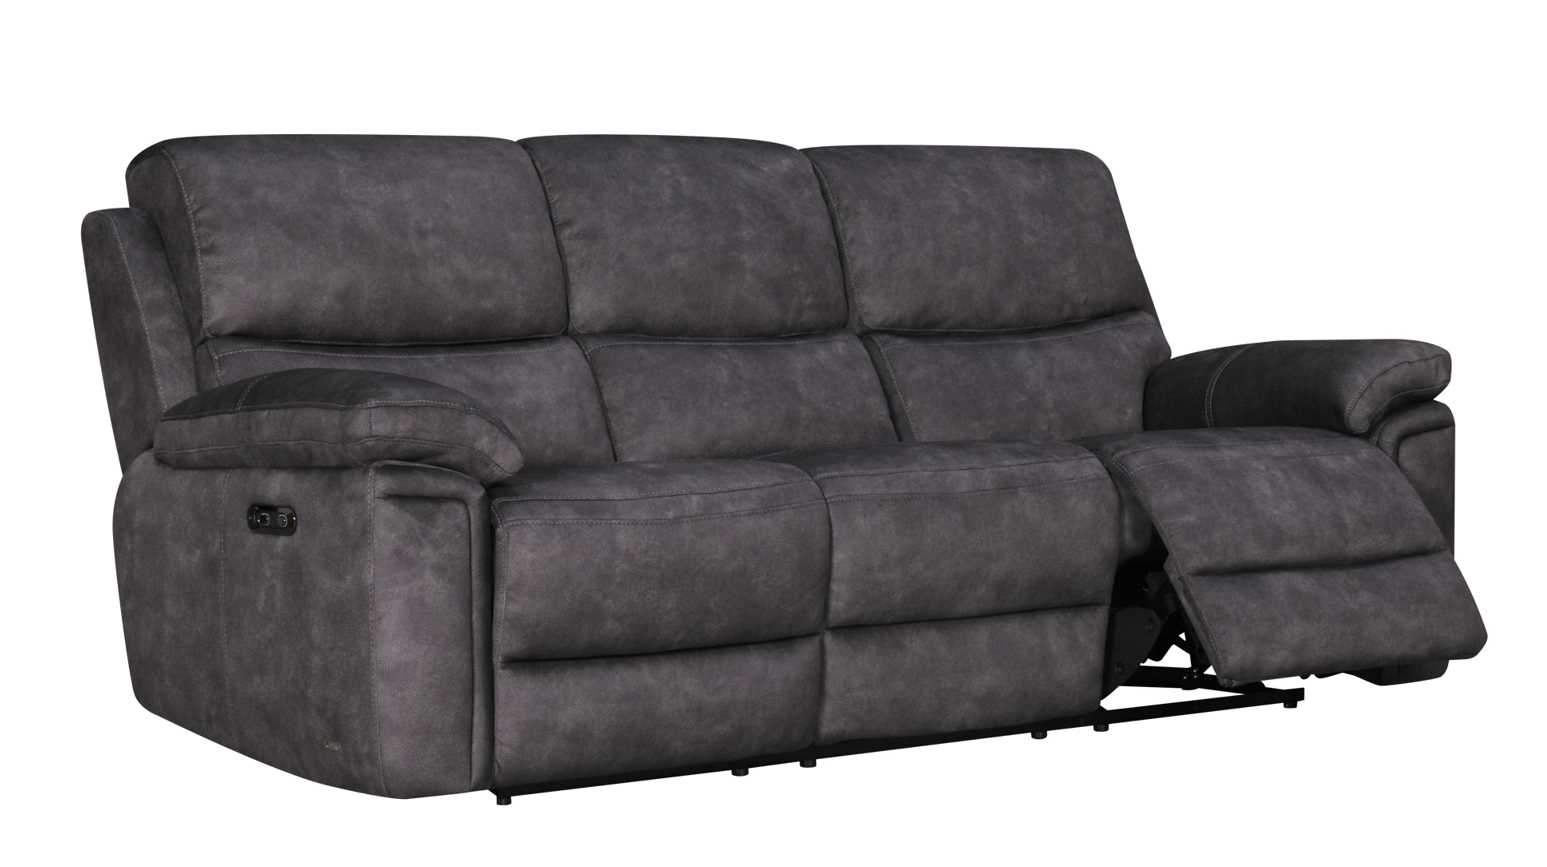 Relax in Elegance The Allure of Reclining Chesterfield Furniture  %Post Title